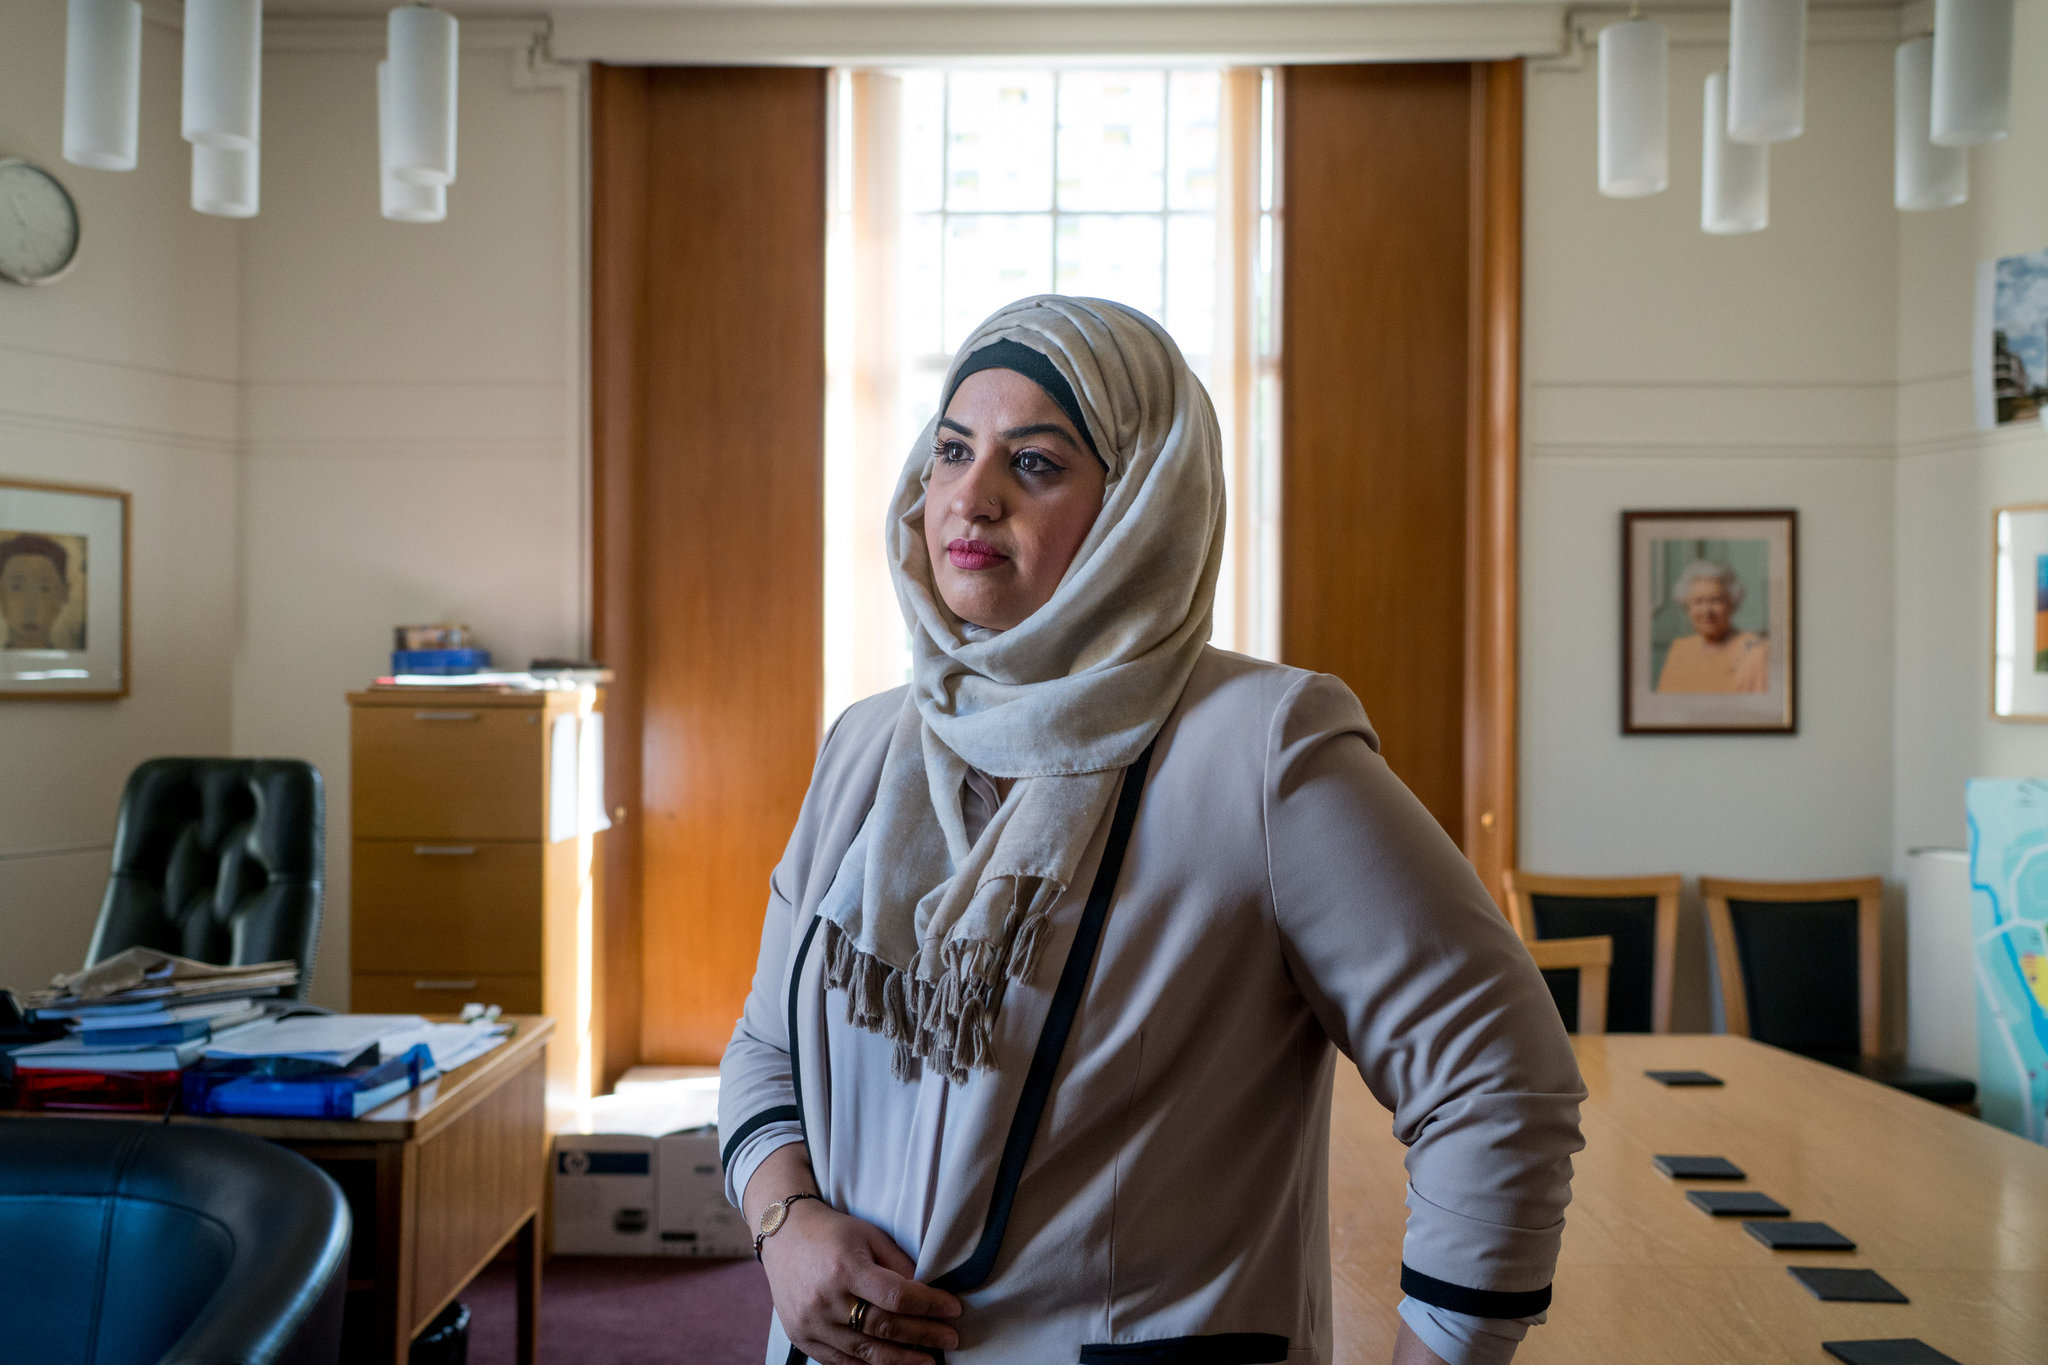 Saima Ashraf, 39, at the Barking Town Hall in London, where she is a leader in the local government. She said such an achievement would not have been possible for her as a veiled woman in her home country, France. Credit Andrew Testa/The New York Times